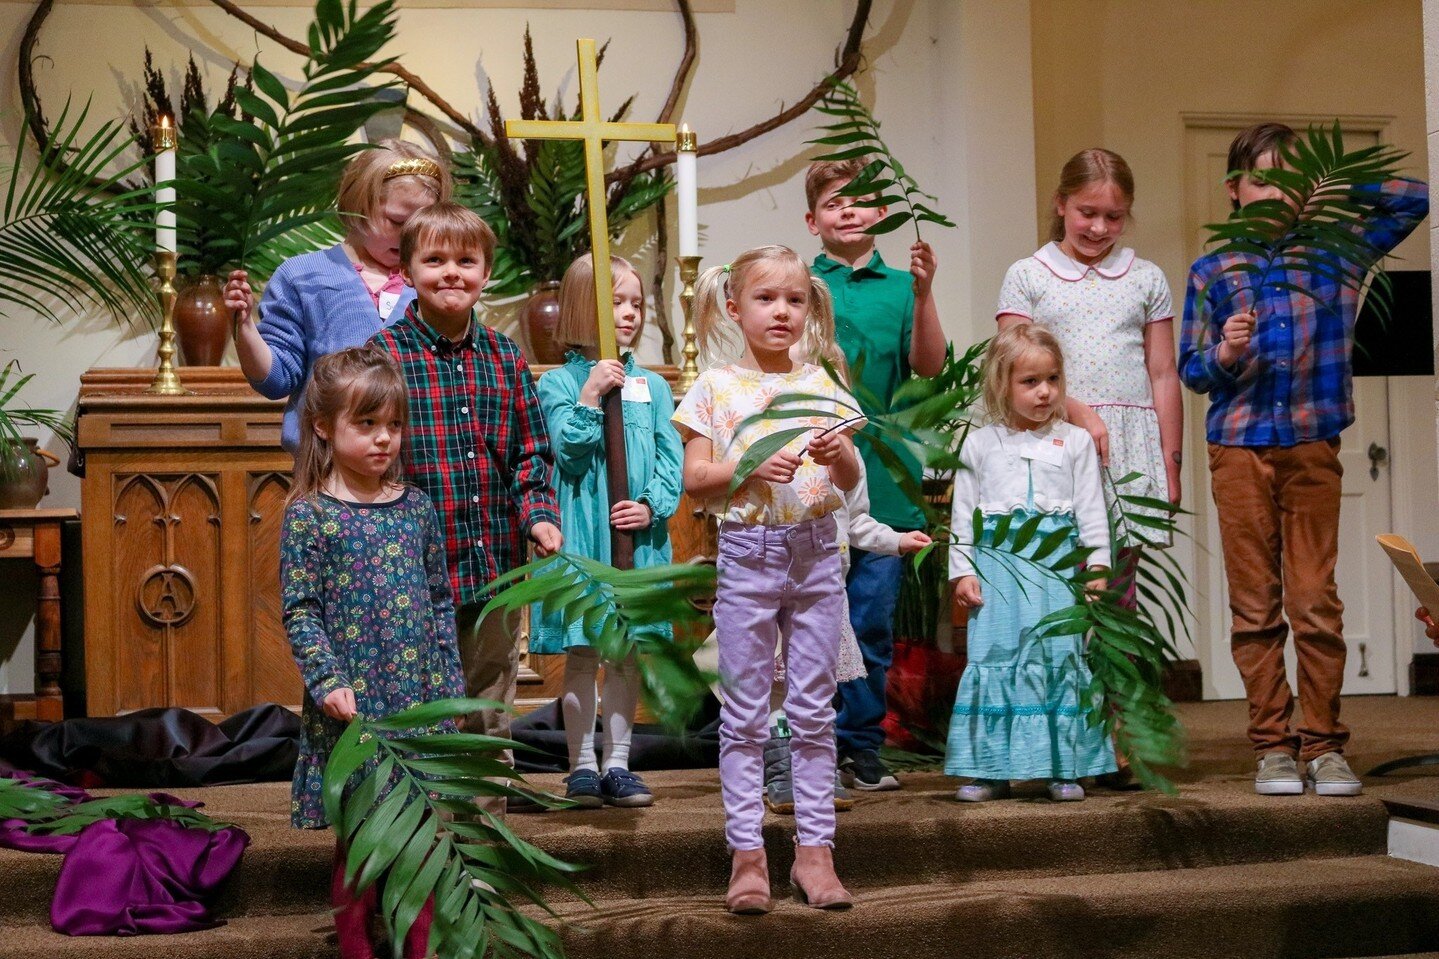 &quot;Hosanna in the highest!&quot; 🎶👏🌴🥳 Holy Week begins today with Palm Sunday, celebrating Christ's triumphant entry into Jerusalem.⁠
⁠
We welcome you to attend the Holy Week services with us this week, including Maundy Thursday, Good Friday, 